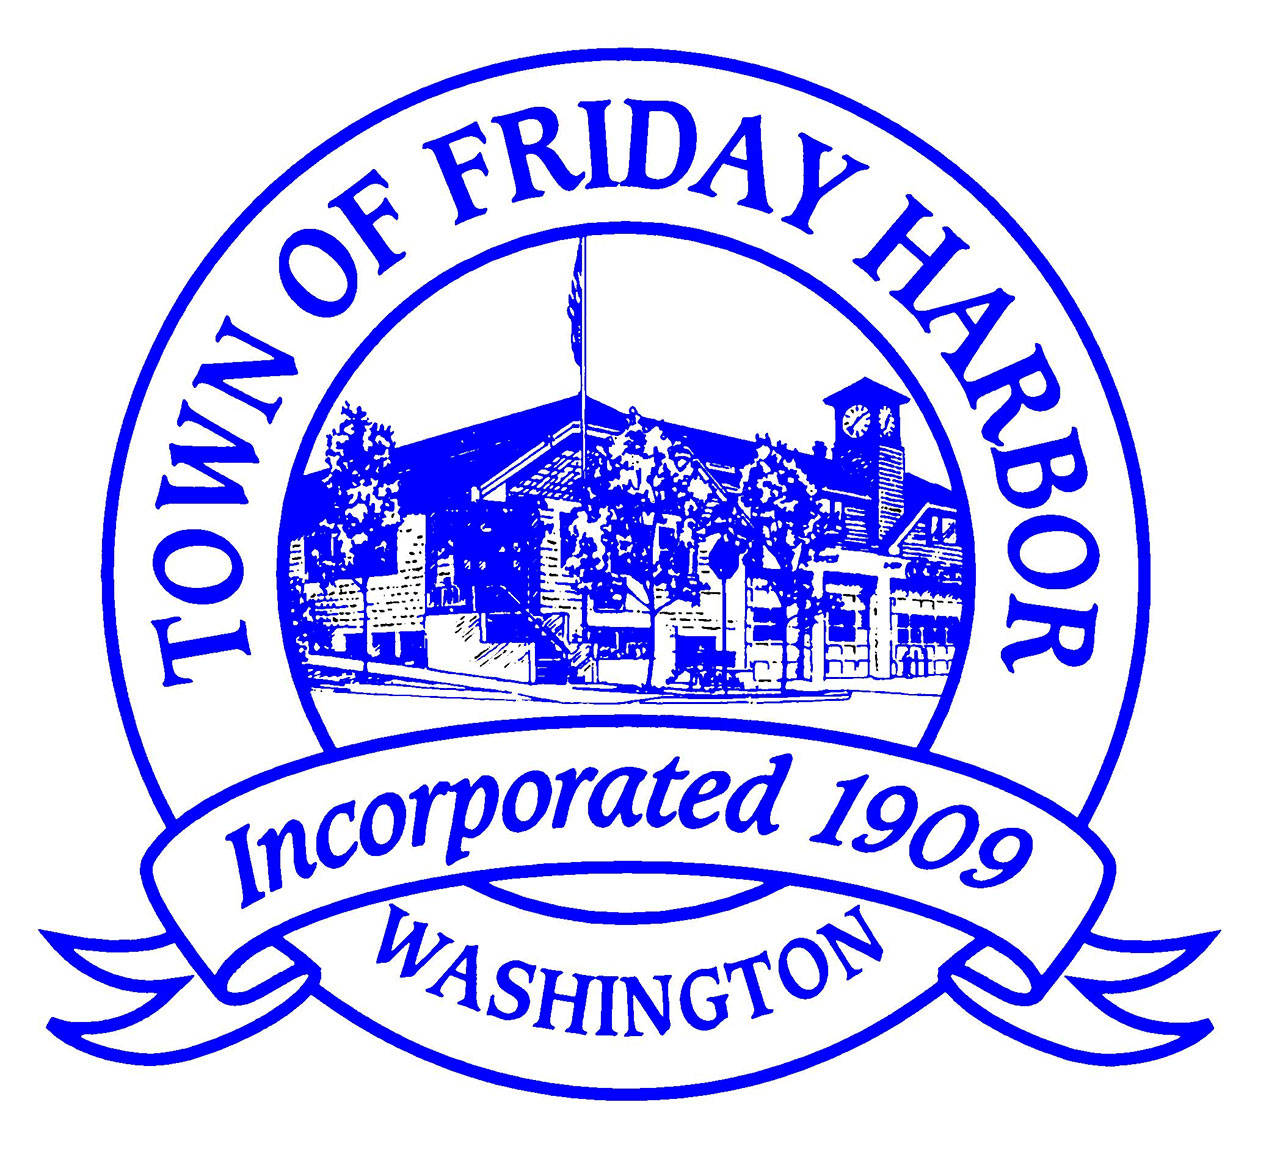 Friday Harbor re-establishes collection of commingled recyclables